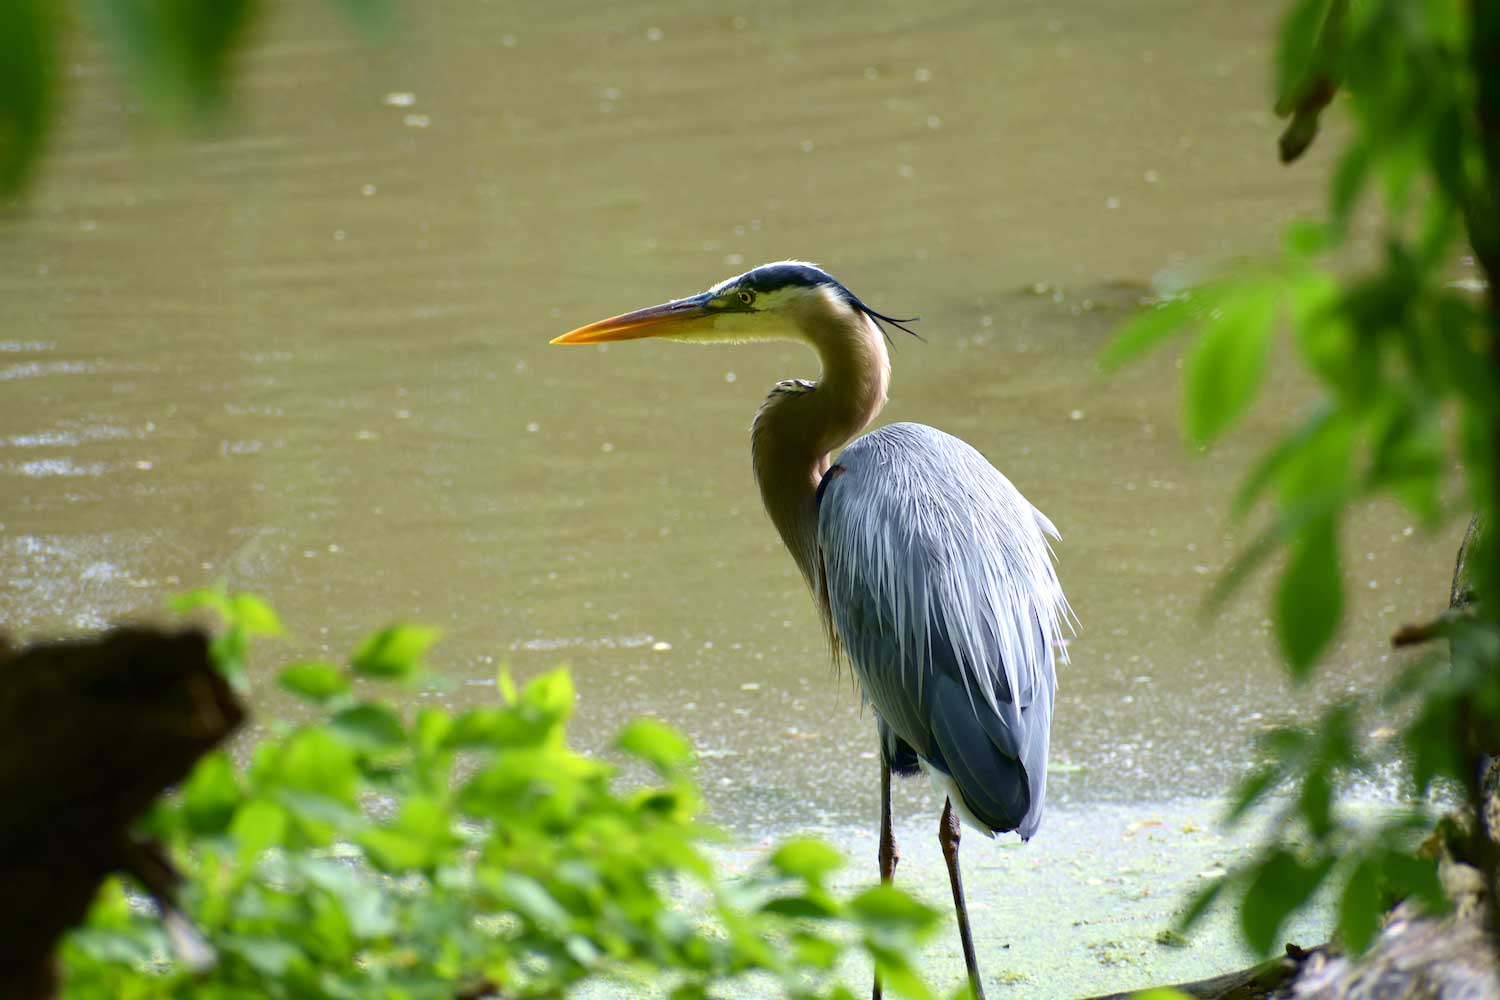 A great blue heron in the water.